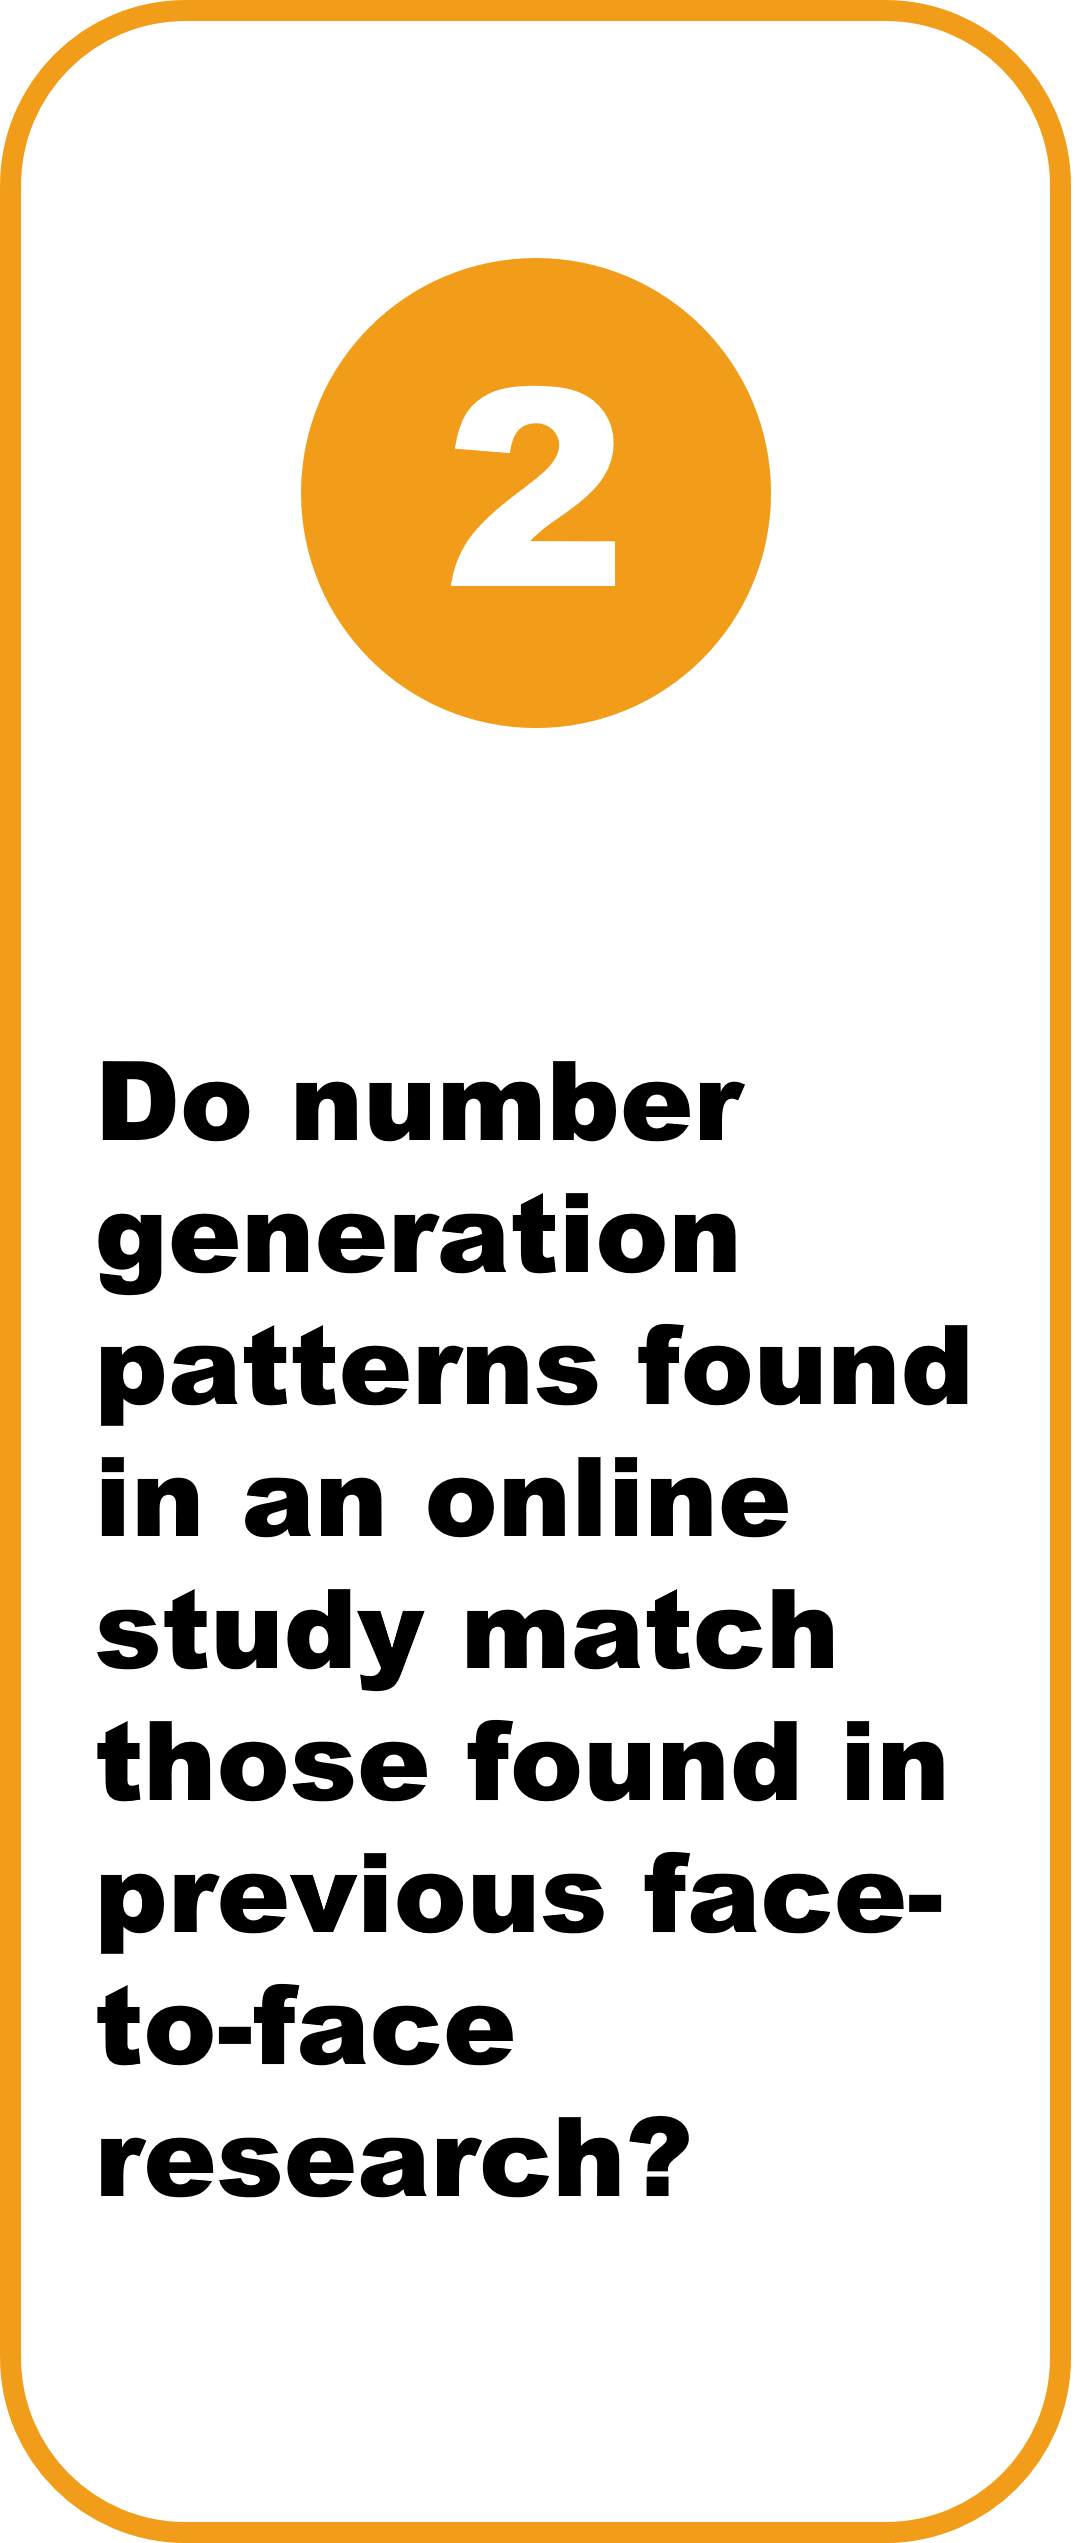 2. Do number generation patterns found in an online study match those found in previous face-to-face research? Yes & No   There was a preference for numbers starting with 1,000, and the number 5,000, as was found by Kubovy (1977) and Scott et al. (2001)  However, more participants gave fully elaborated numbers, without any zeros, in this study compared to face-to-face research